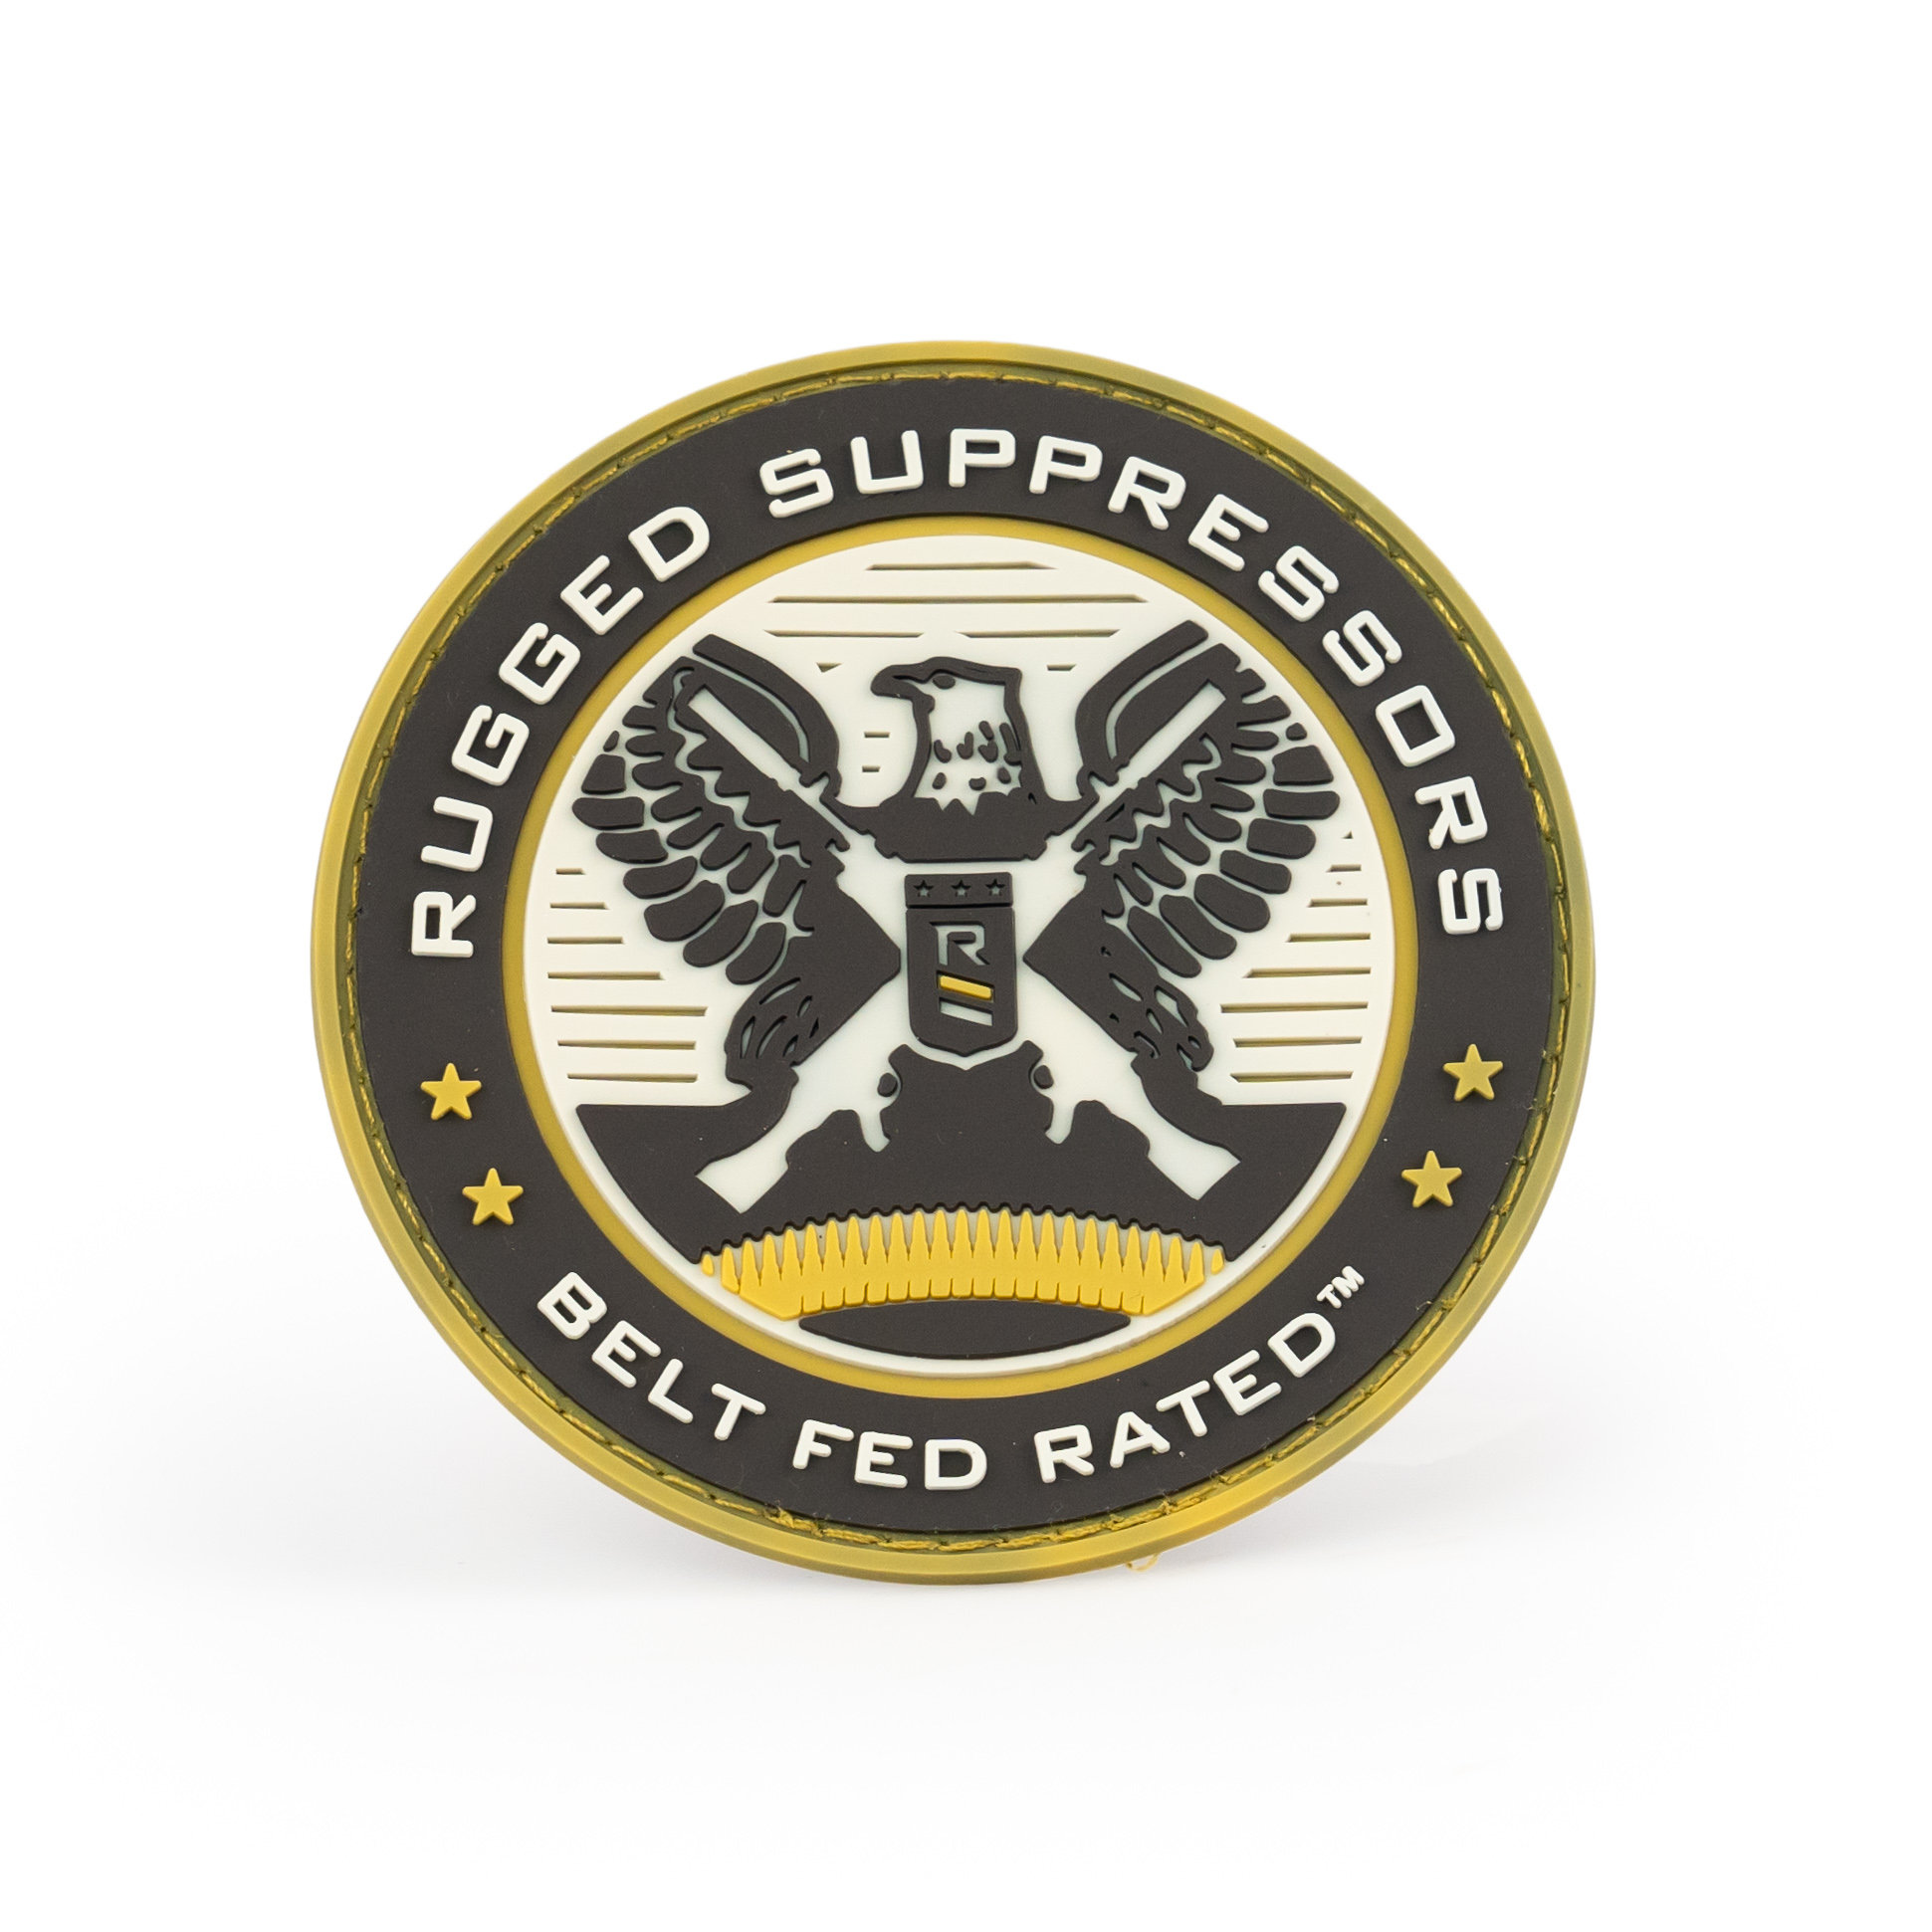 PVC Morale Patch - Belt Fed Rated - Rugged Suppressors